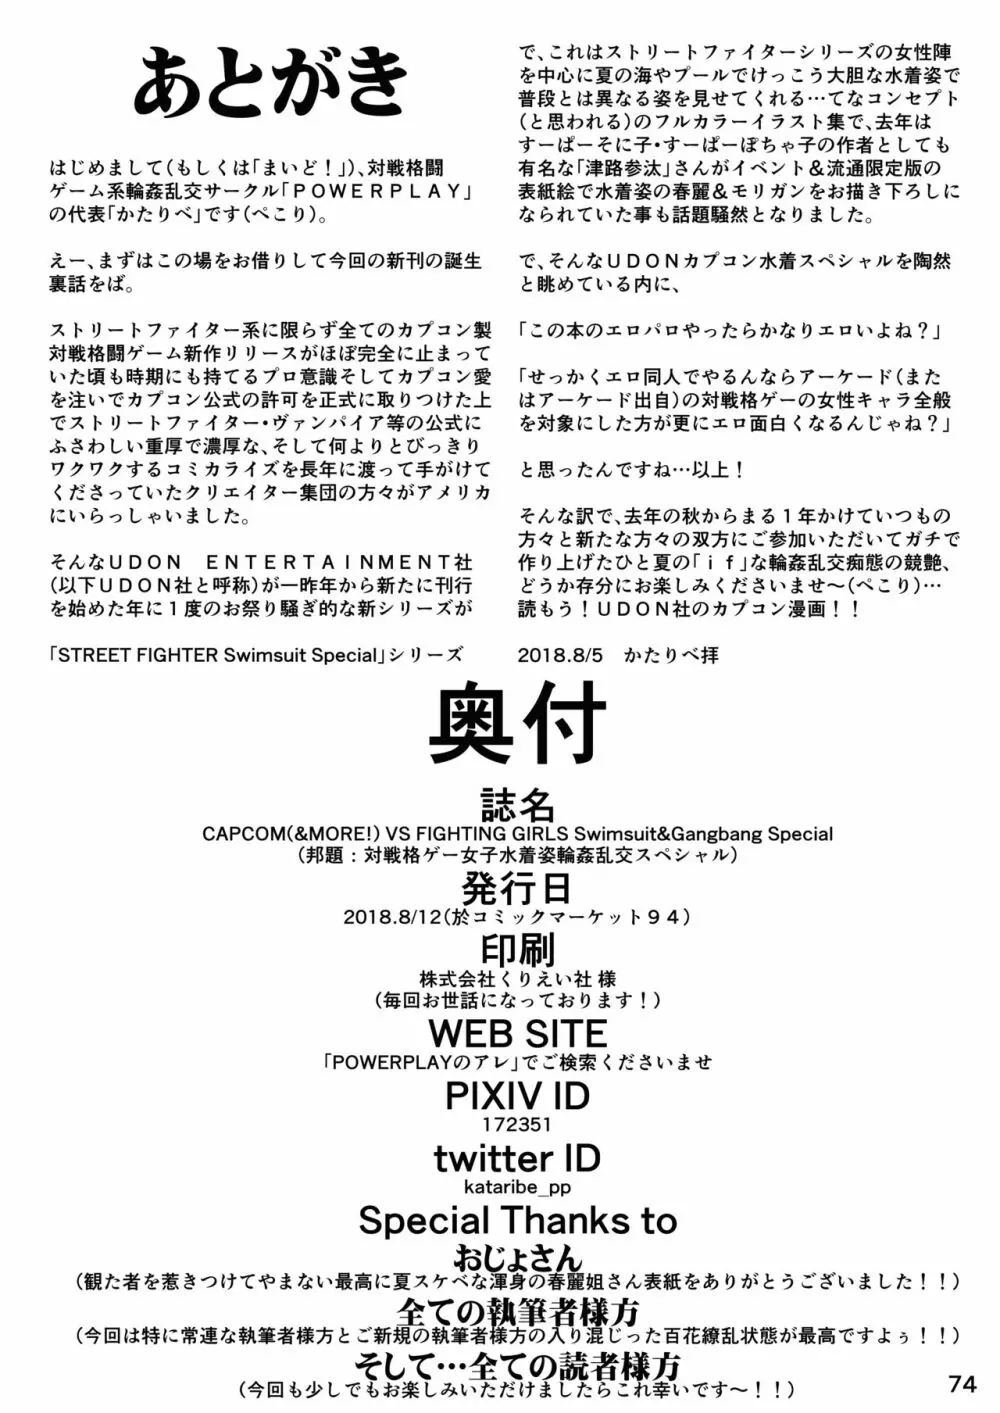 [POWERPLAY (よろず)] CAPCOM(&MORE!) VS FIGHTING GIRLS Swimsuit&Gangbang Special (よろず) [DL版] Page.73